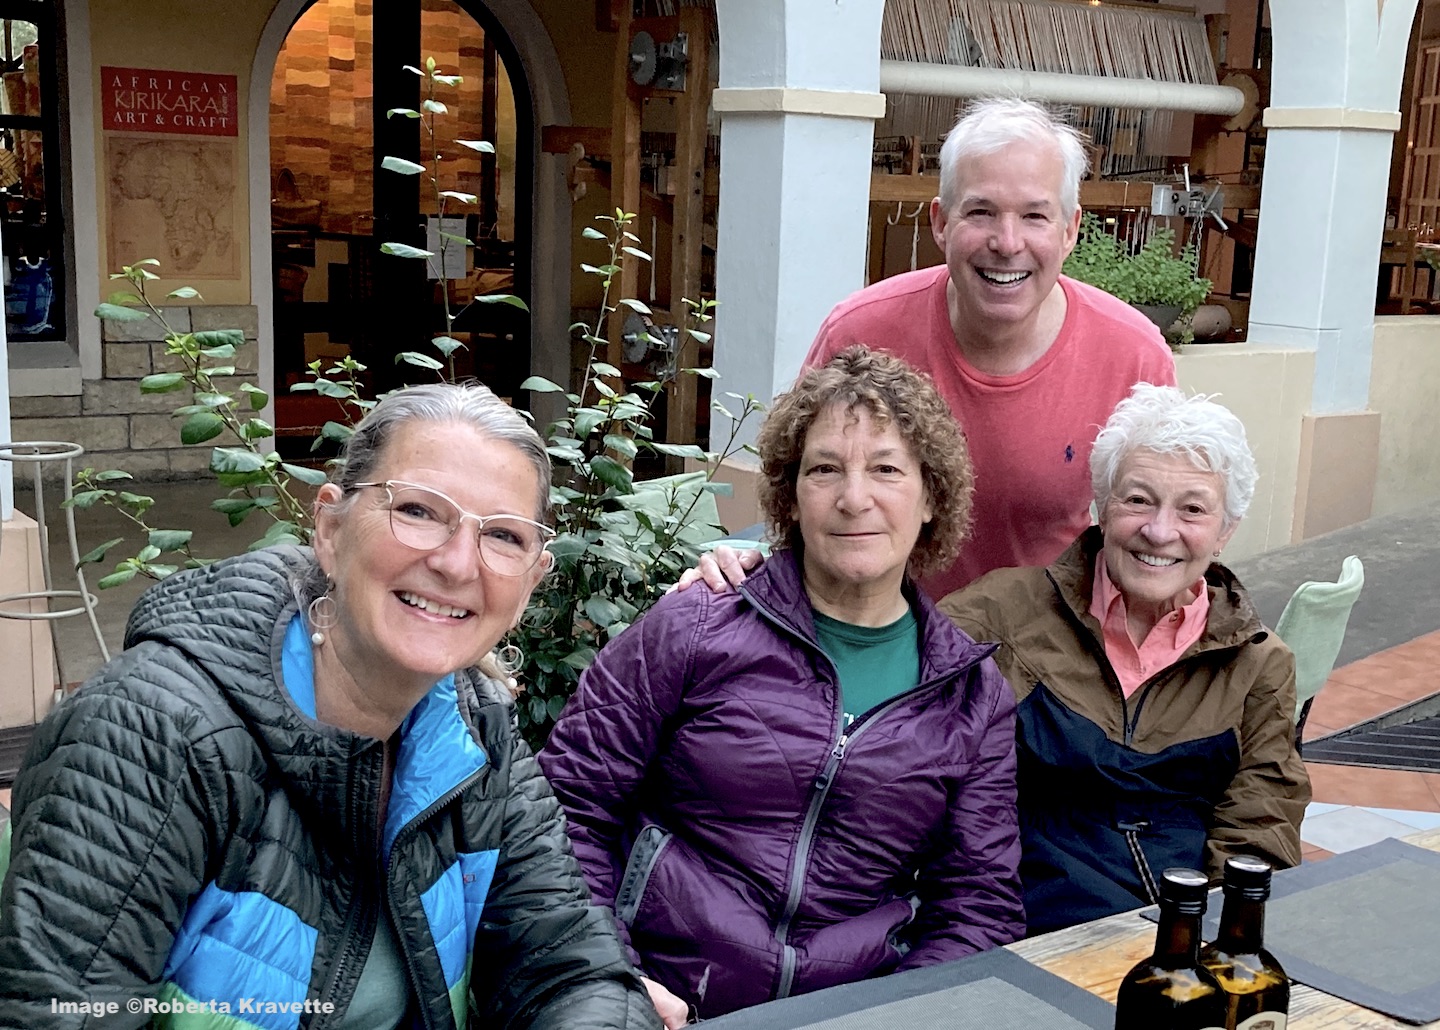 First morning in Windhoek, Connie, Penny, Jane, and John Image: ©Roberta Kravette